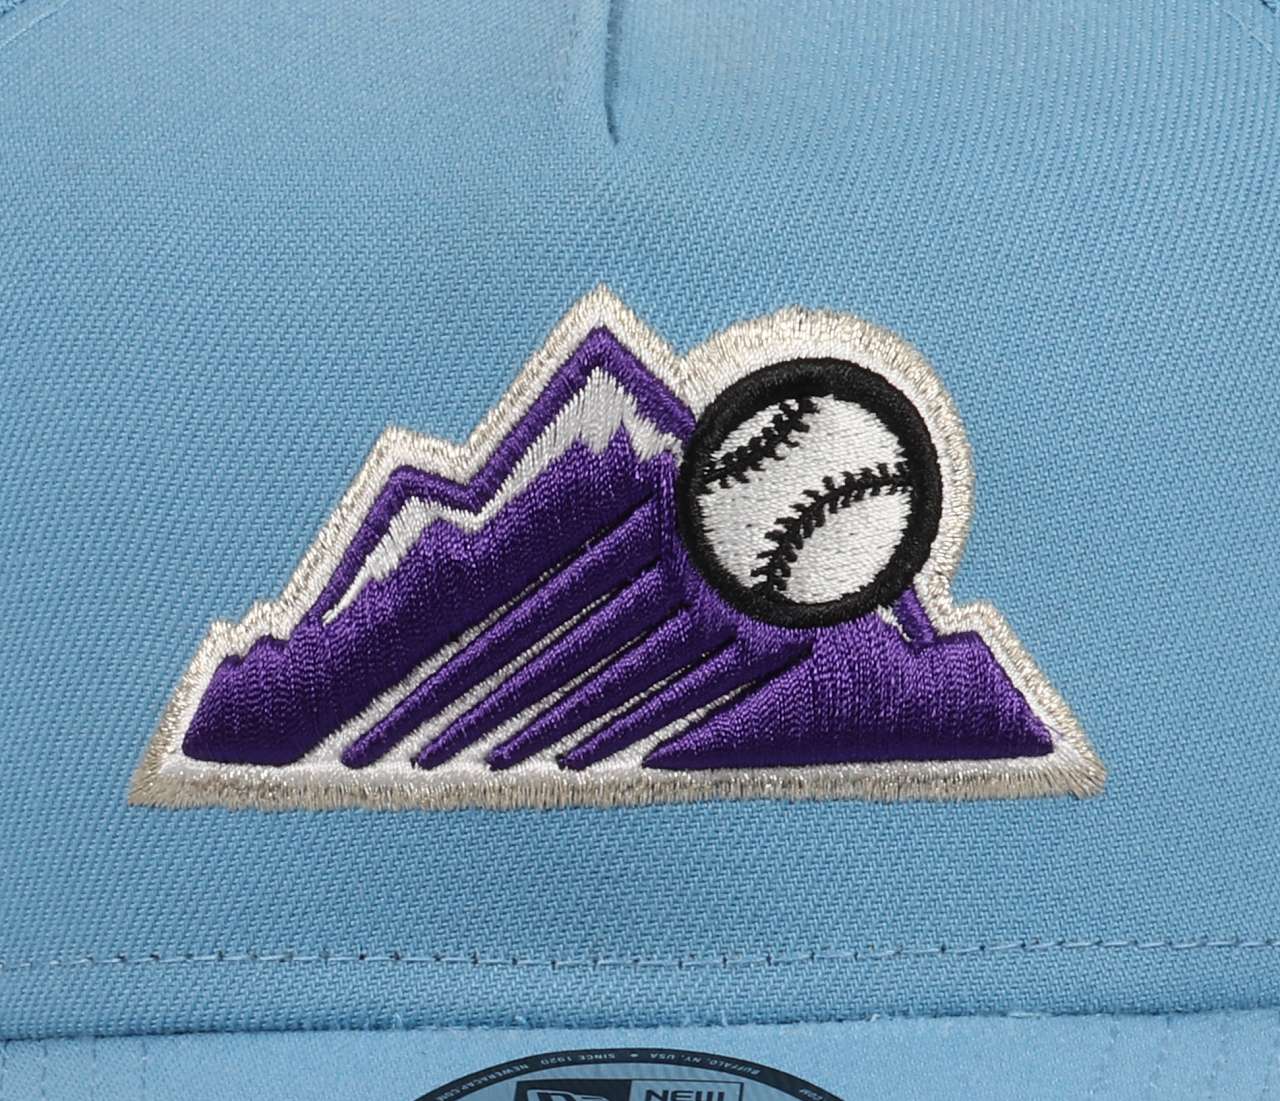 Colorado Rockies MLB Cooperstown Sky Blue 9Forty A-Frame Snapback Cap New Era